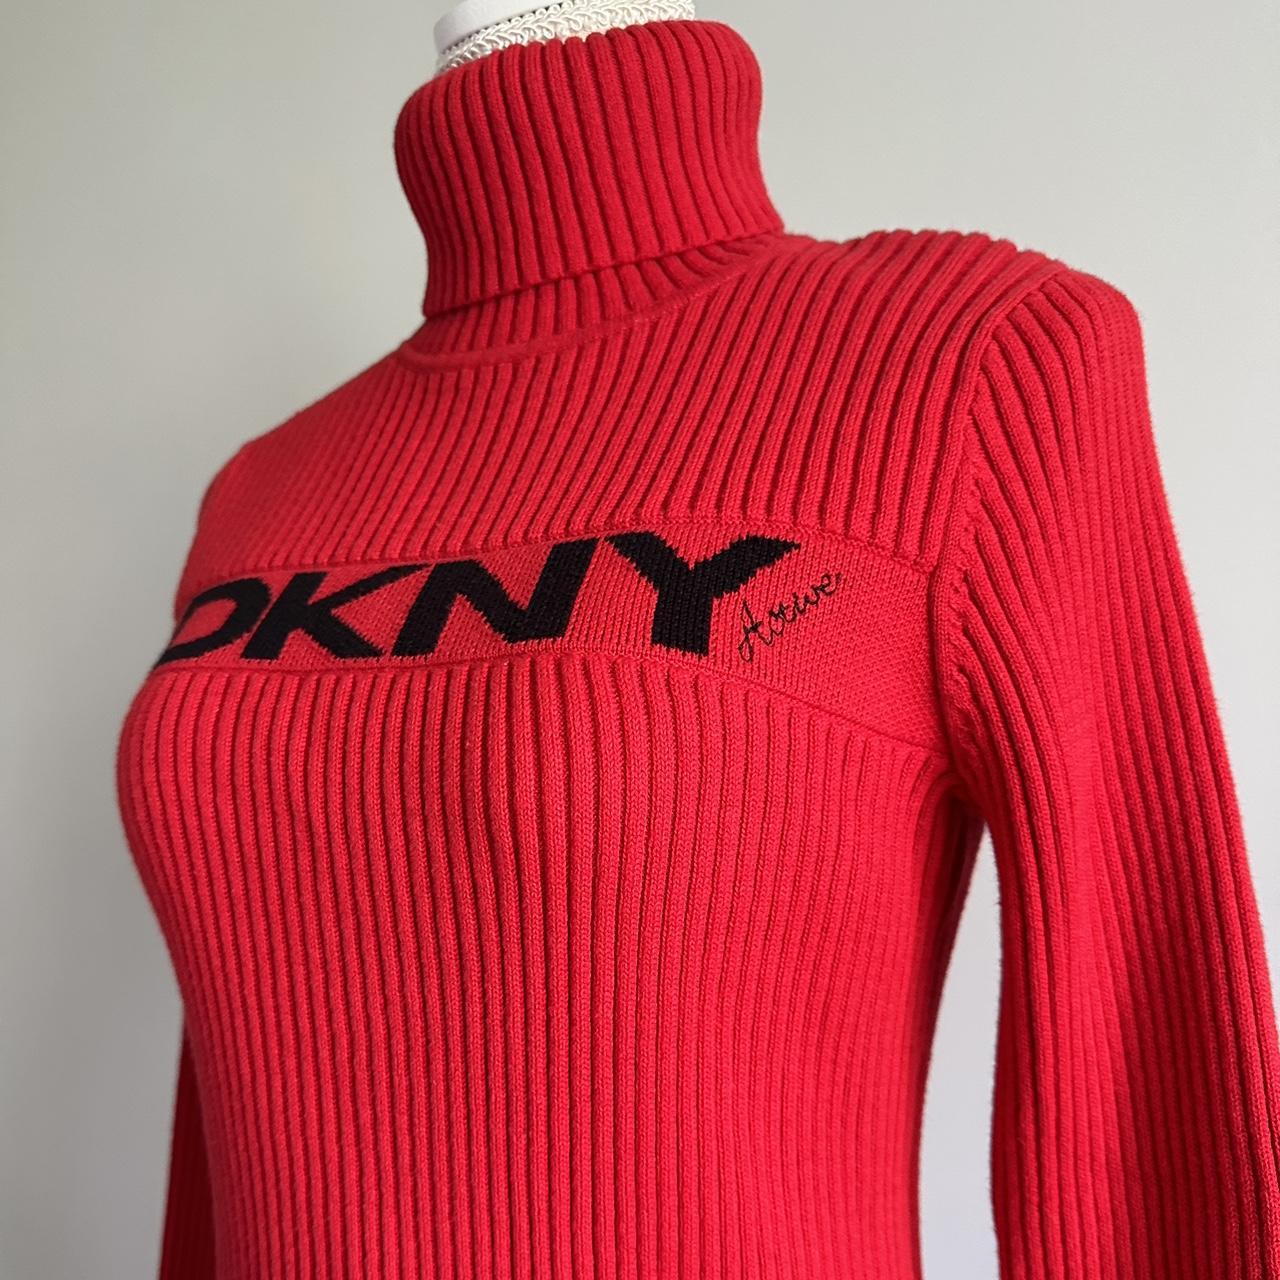 DKNY Women's Red and Black Jumper (4)